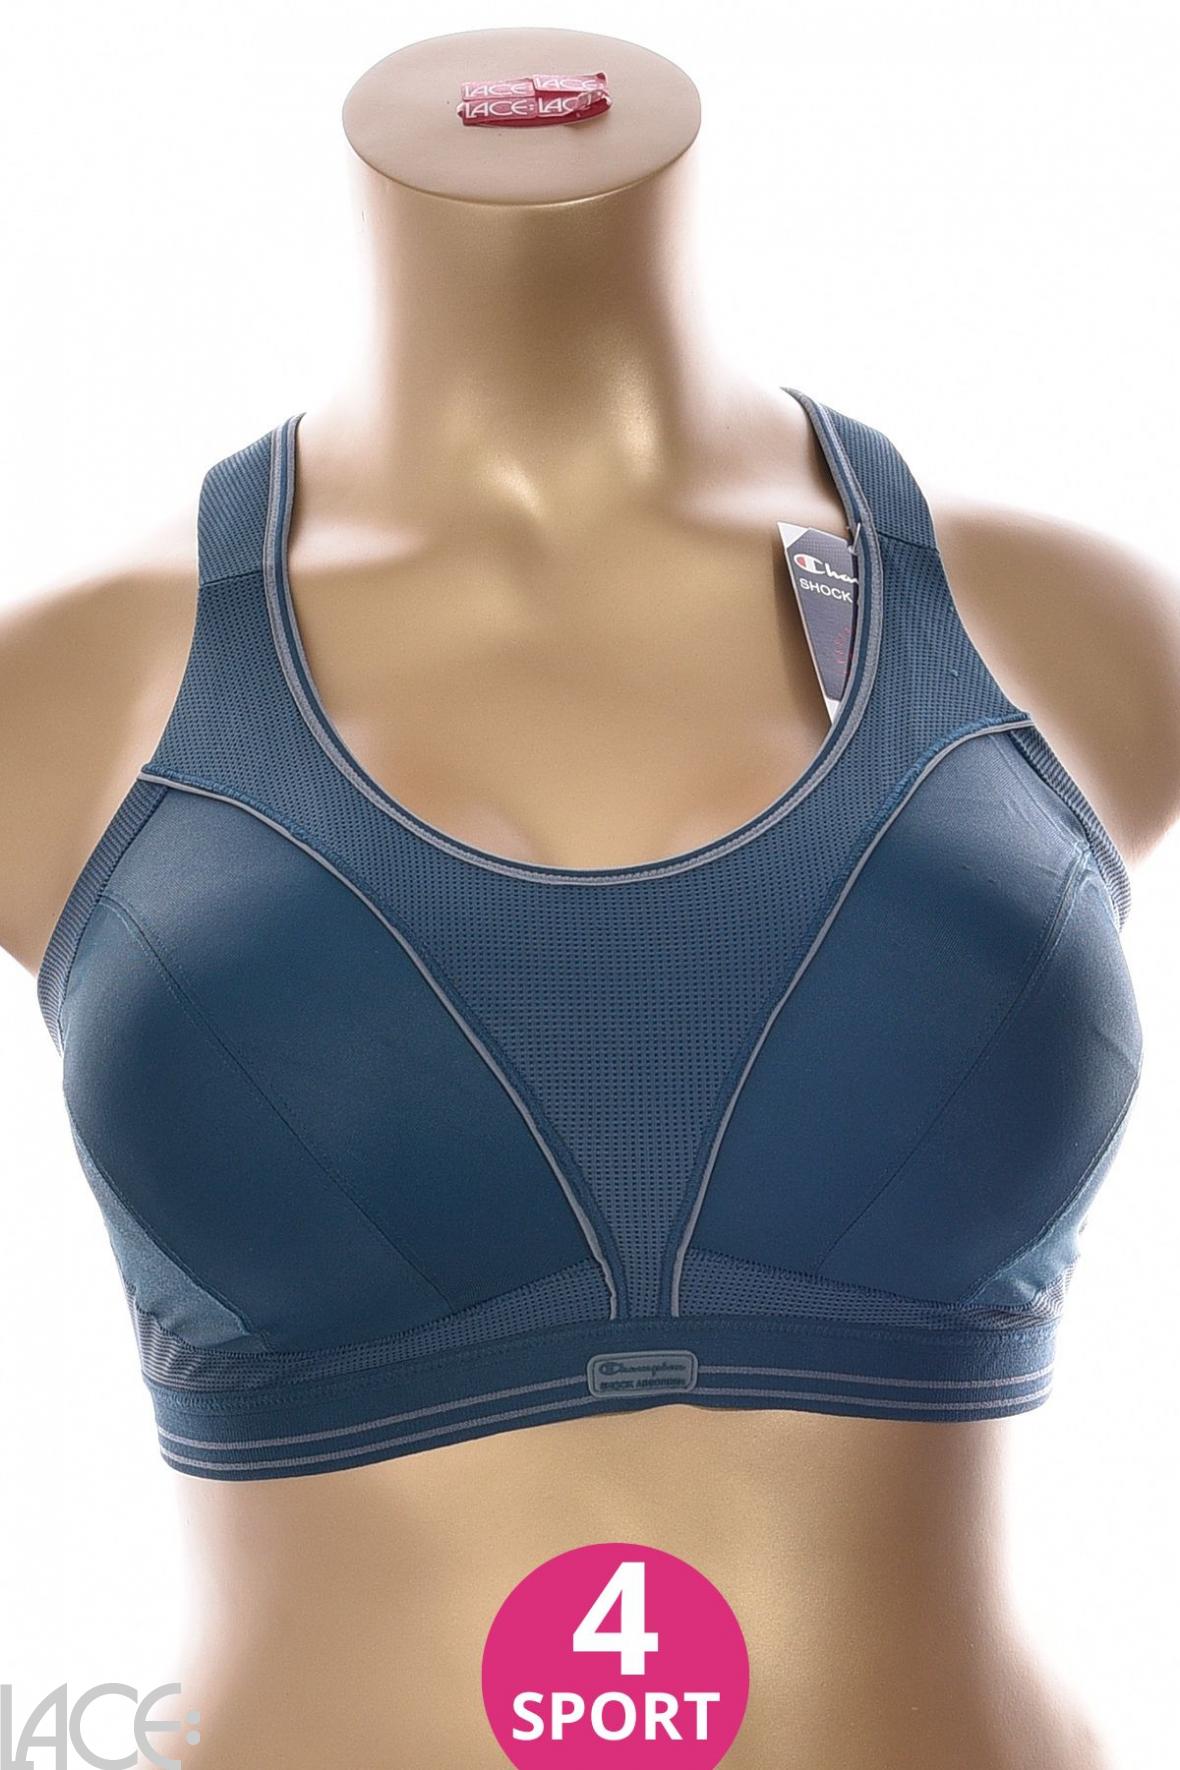 BIG CLEAROUT Shock Absorber ACTIVE SPORT PADDED - Sports Bra - Women's -  blue/red - Private Sport Shop